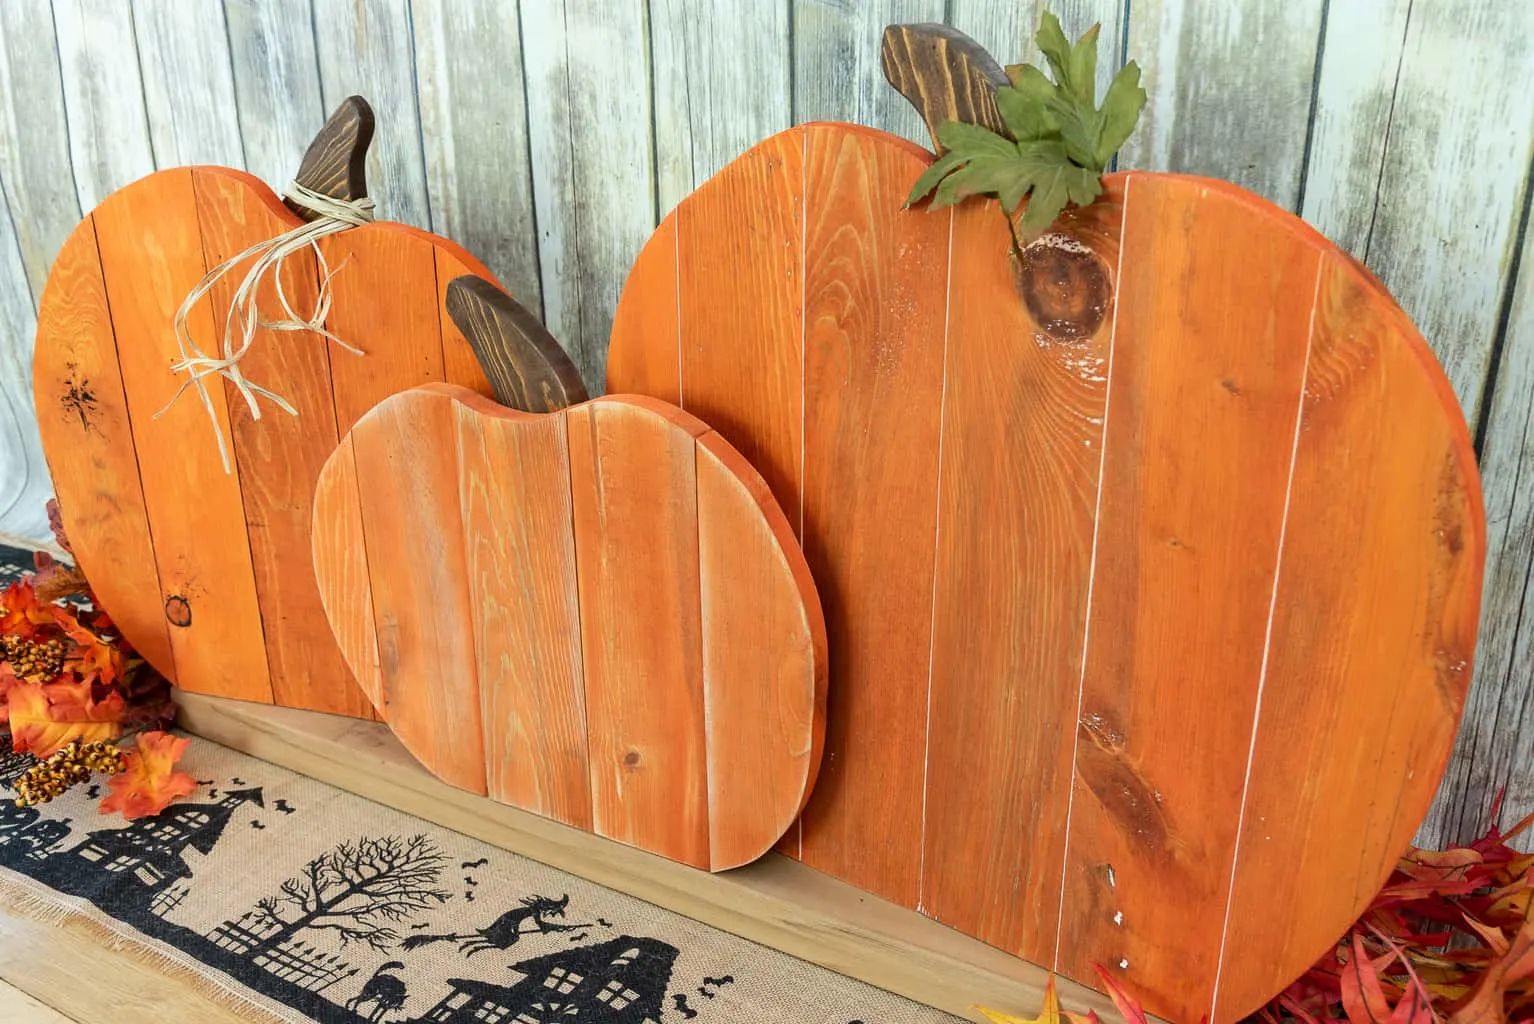 three pallet pumpkins in front of a rustic background